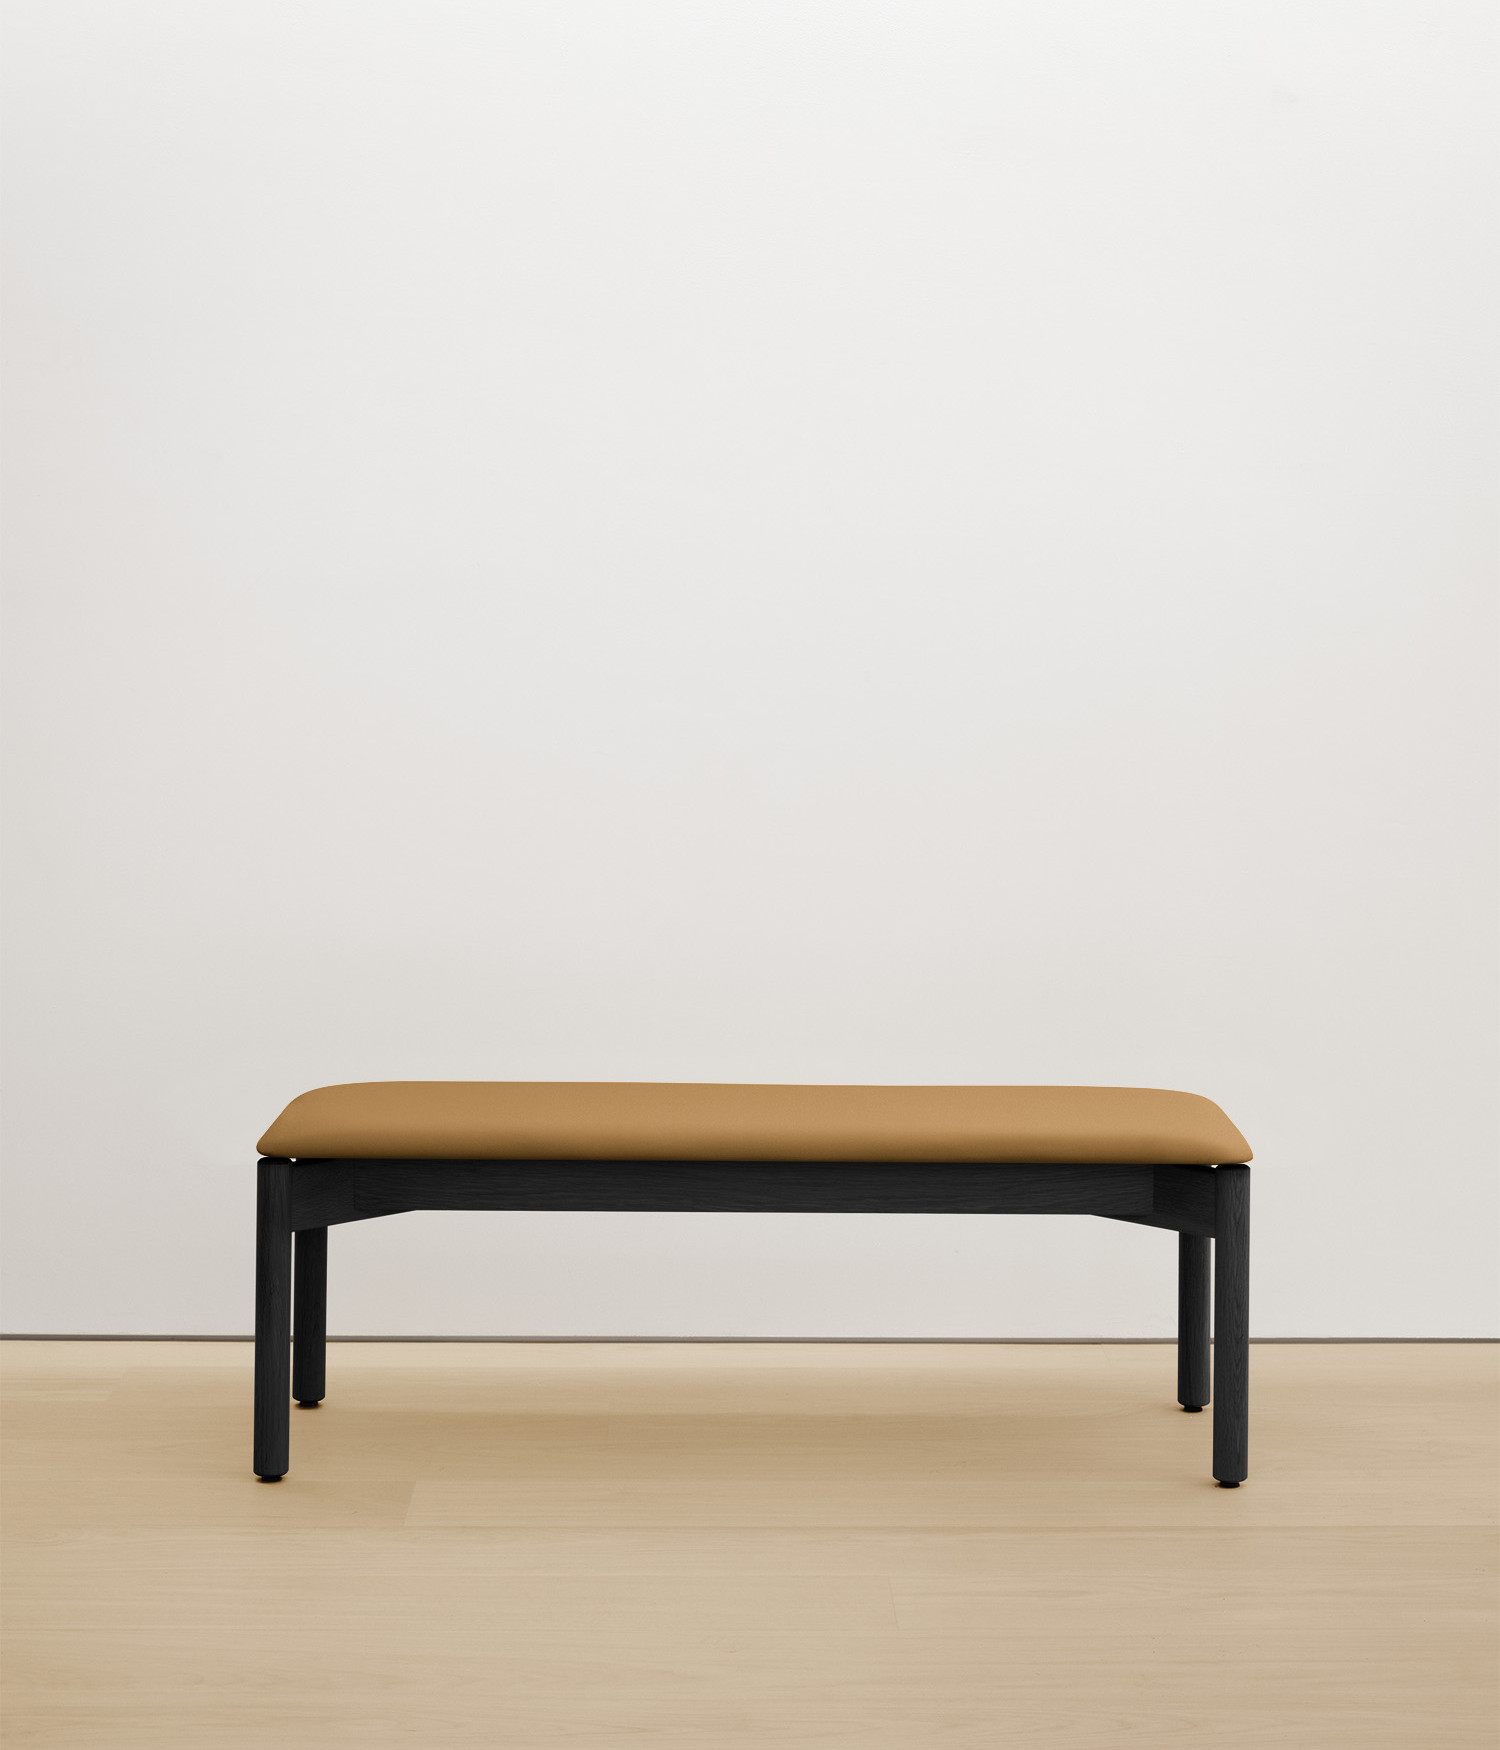 black-stained-oak bench with tan upholstered seat